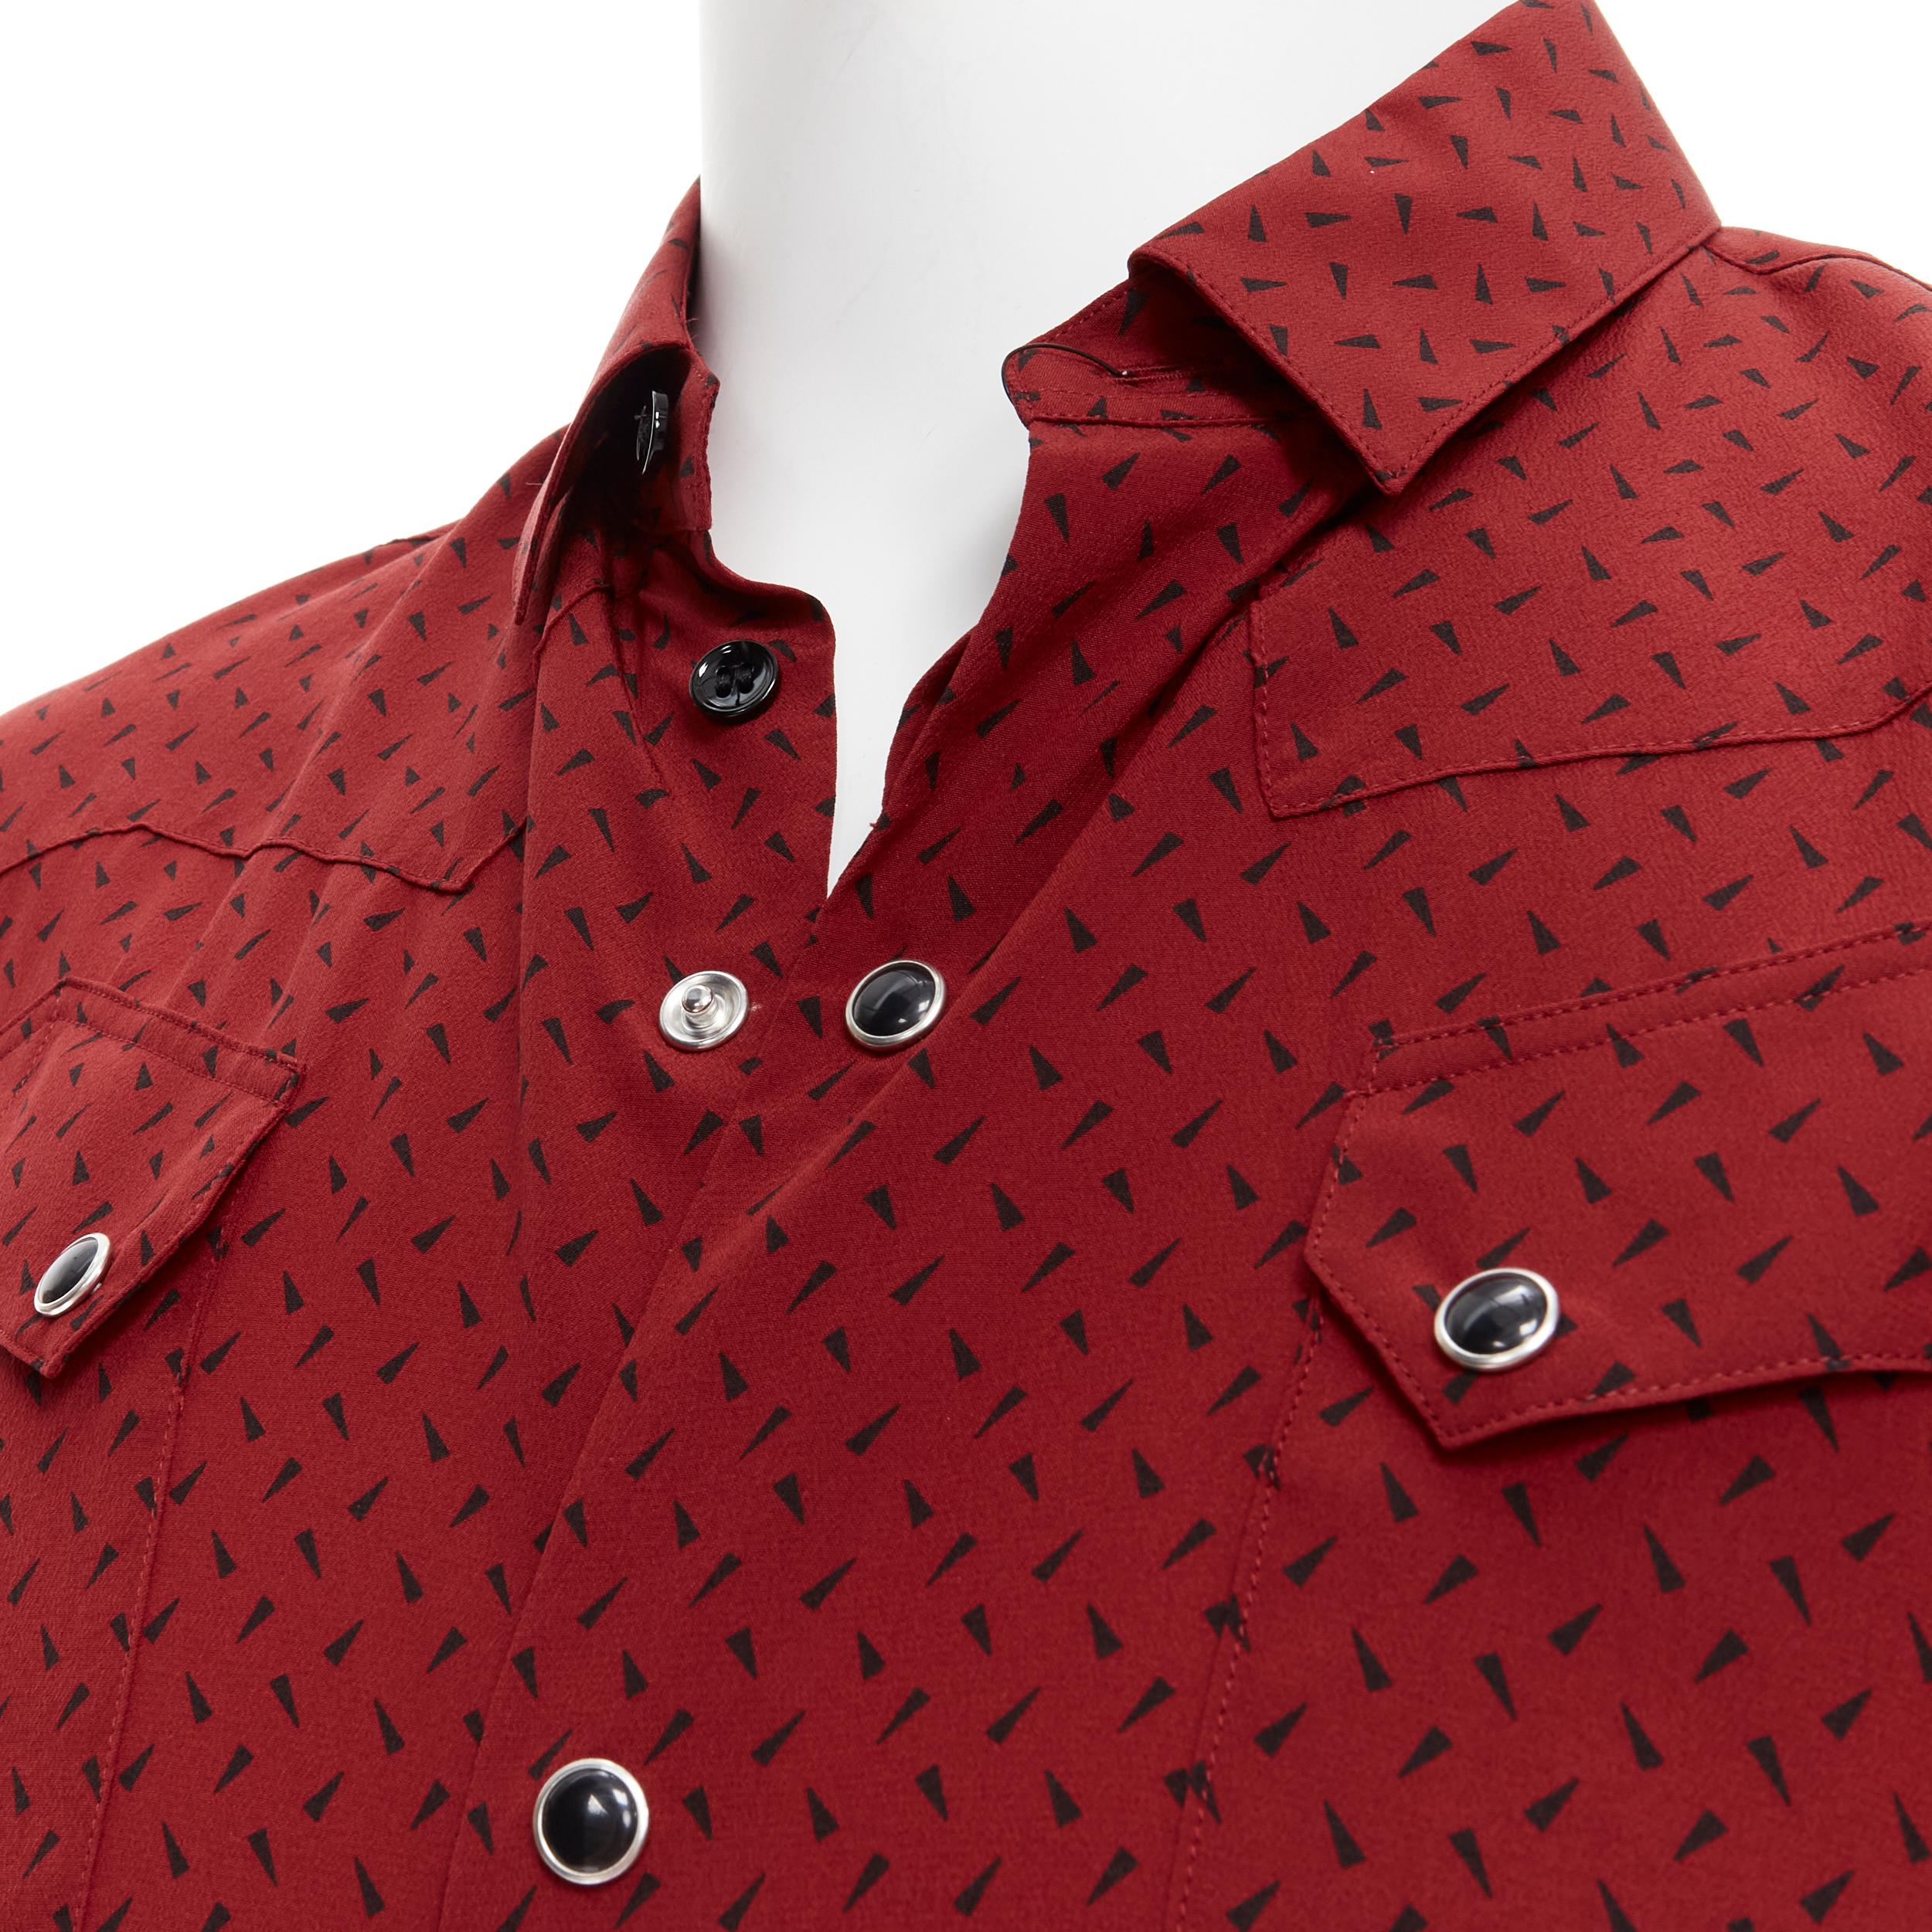 new SAINT LAURENT 2018 100% silk red black print western casual shirt EU40 L 
Reference: TGAS/B01735 
Brand: Saint Laurent 
Designer: Anthony Vaccarello 
Collection: 2018 
Material: Silk 
Color: Red 
Pattern: Abstract 
Closure: Button 
Extra Detail: